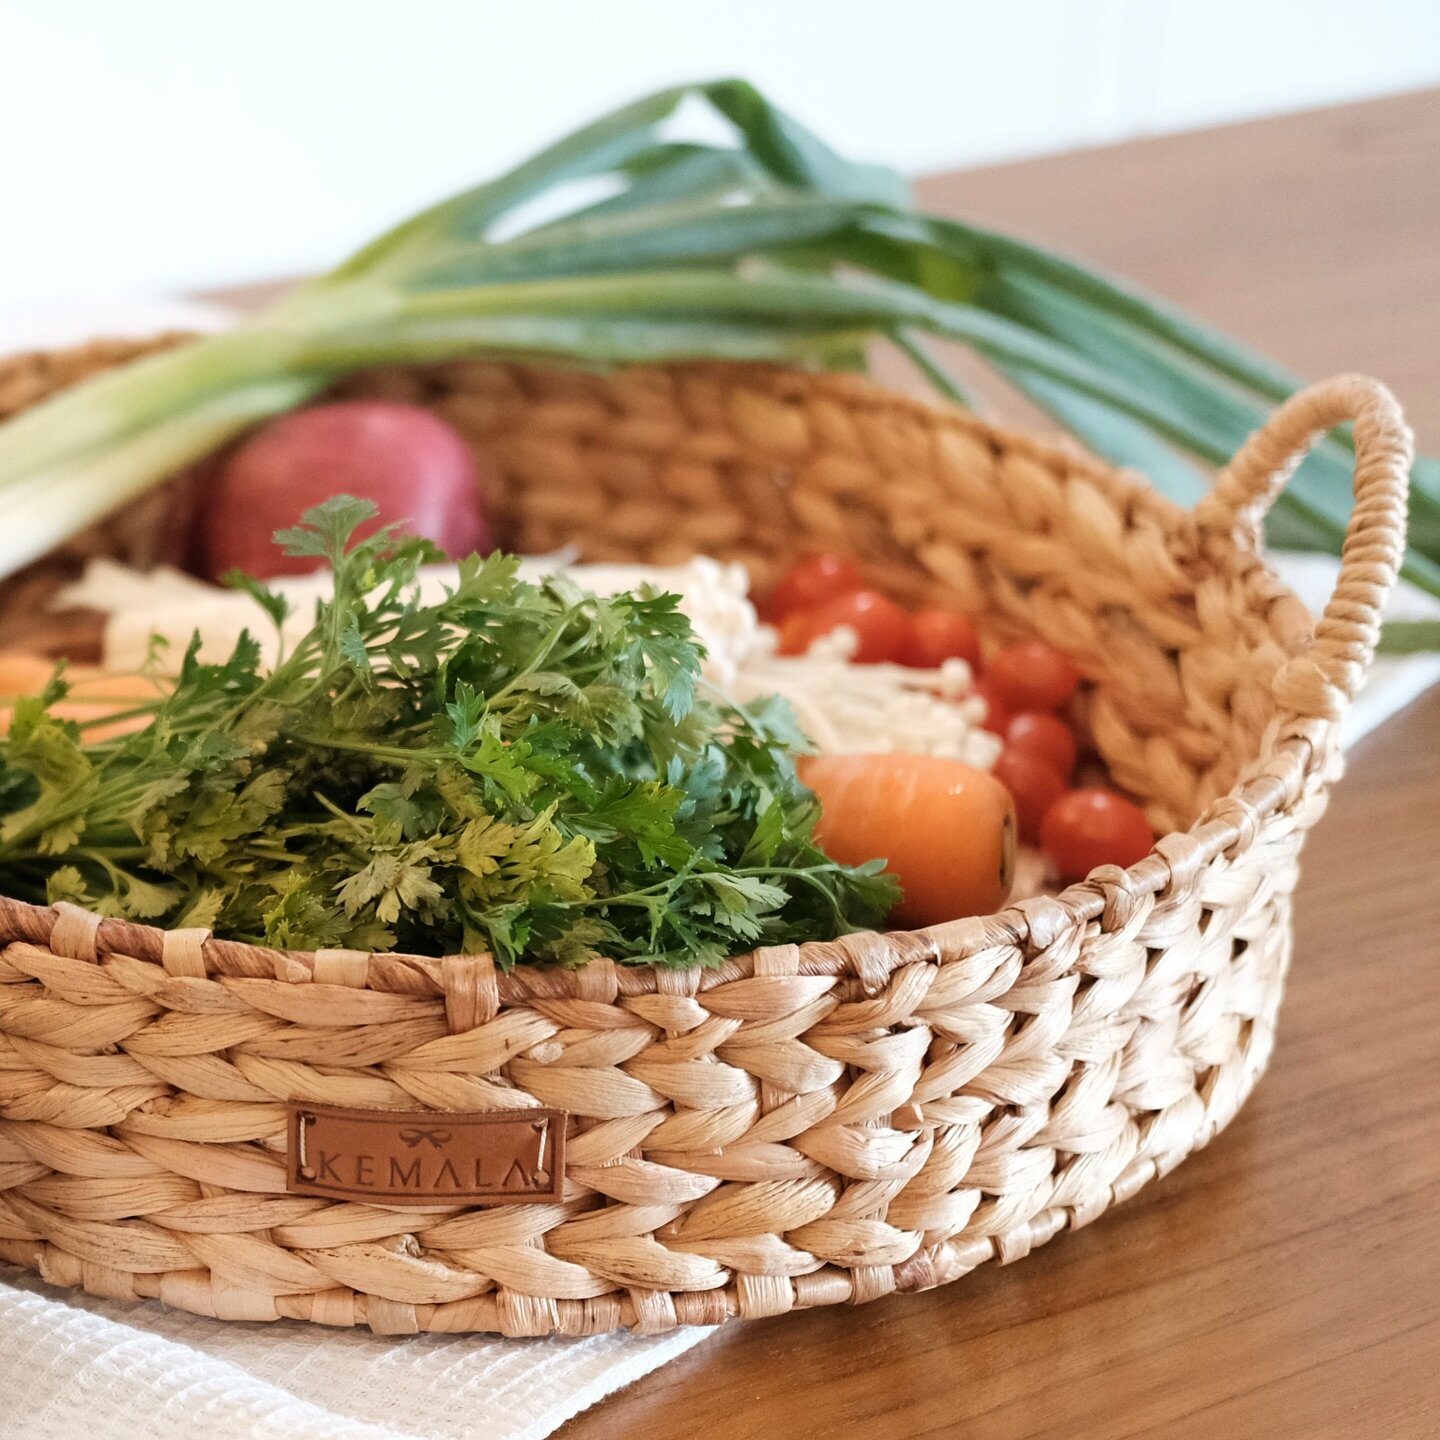 We love our fibre trays for various things, including laying out ingredients in the kitchen! With a sturdy steel frame, these beauties add a special warmth to your space.